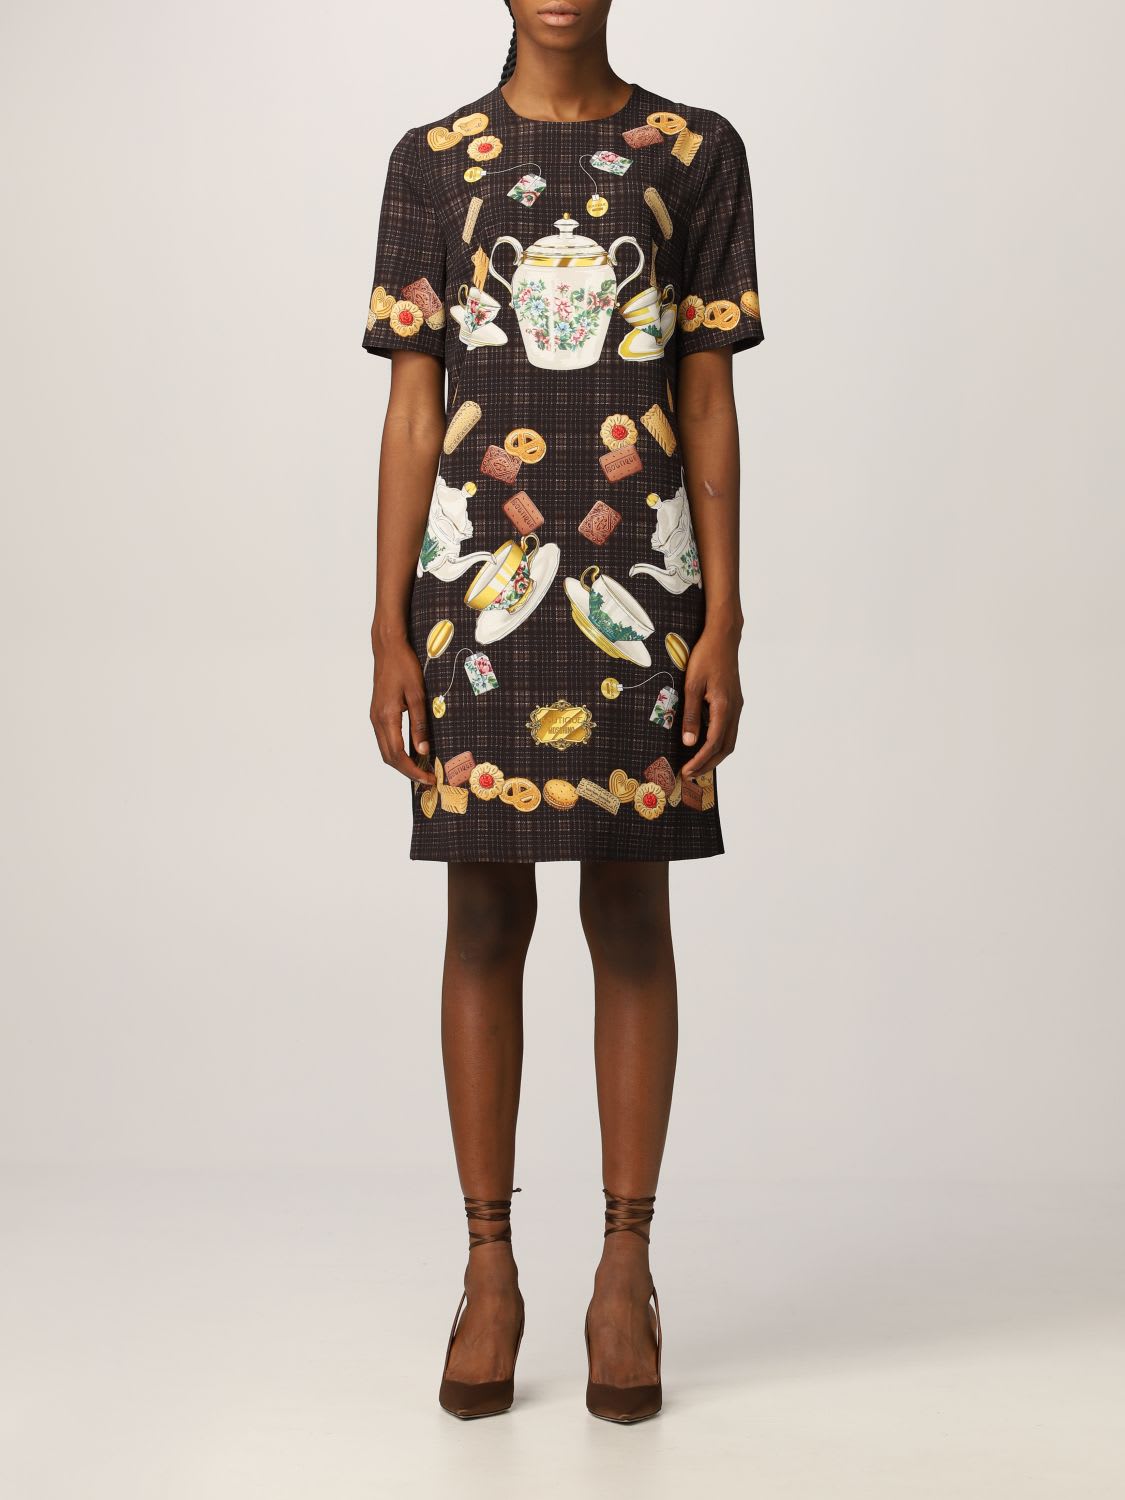 Boutique Moschino Dress Moschino Boutique Short Dress In Printed Crepe